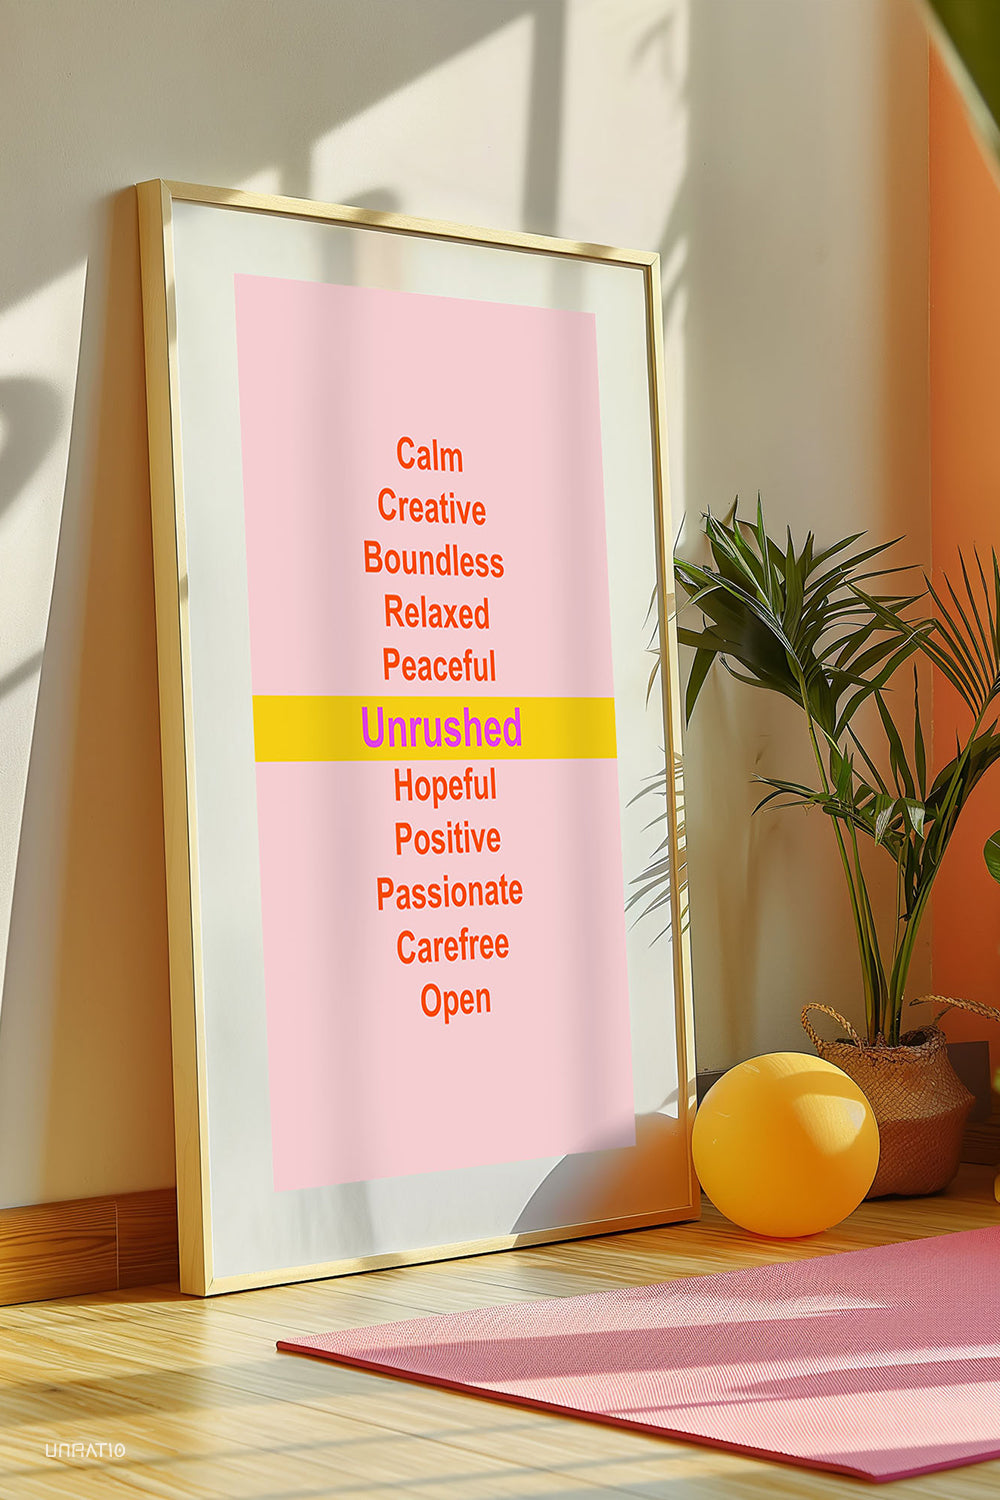 Framed motivational poster with peaceful affirmations on a pink backdrop, placed in a sunny room with yoga mat and plant, inspiring a tranquil lifestyle.